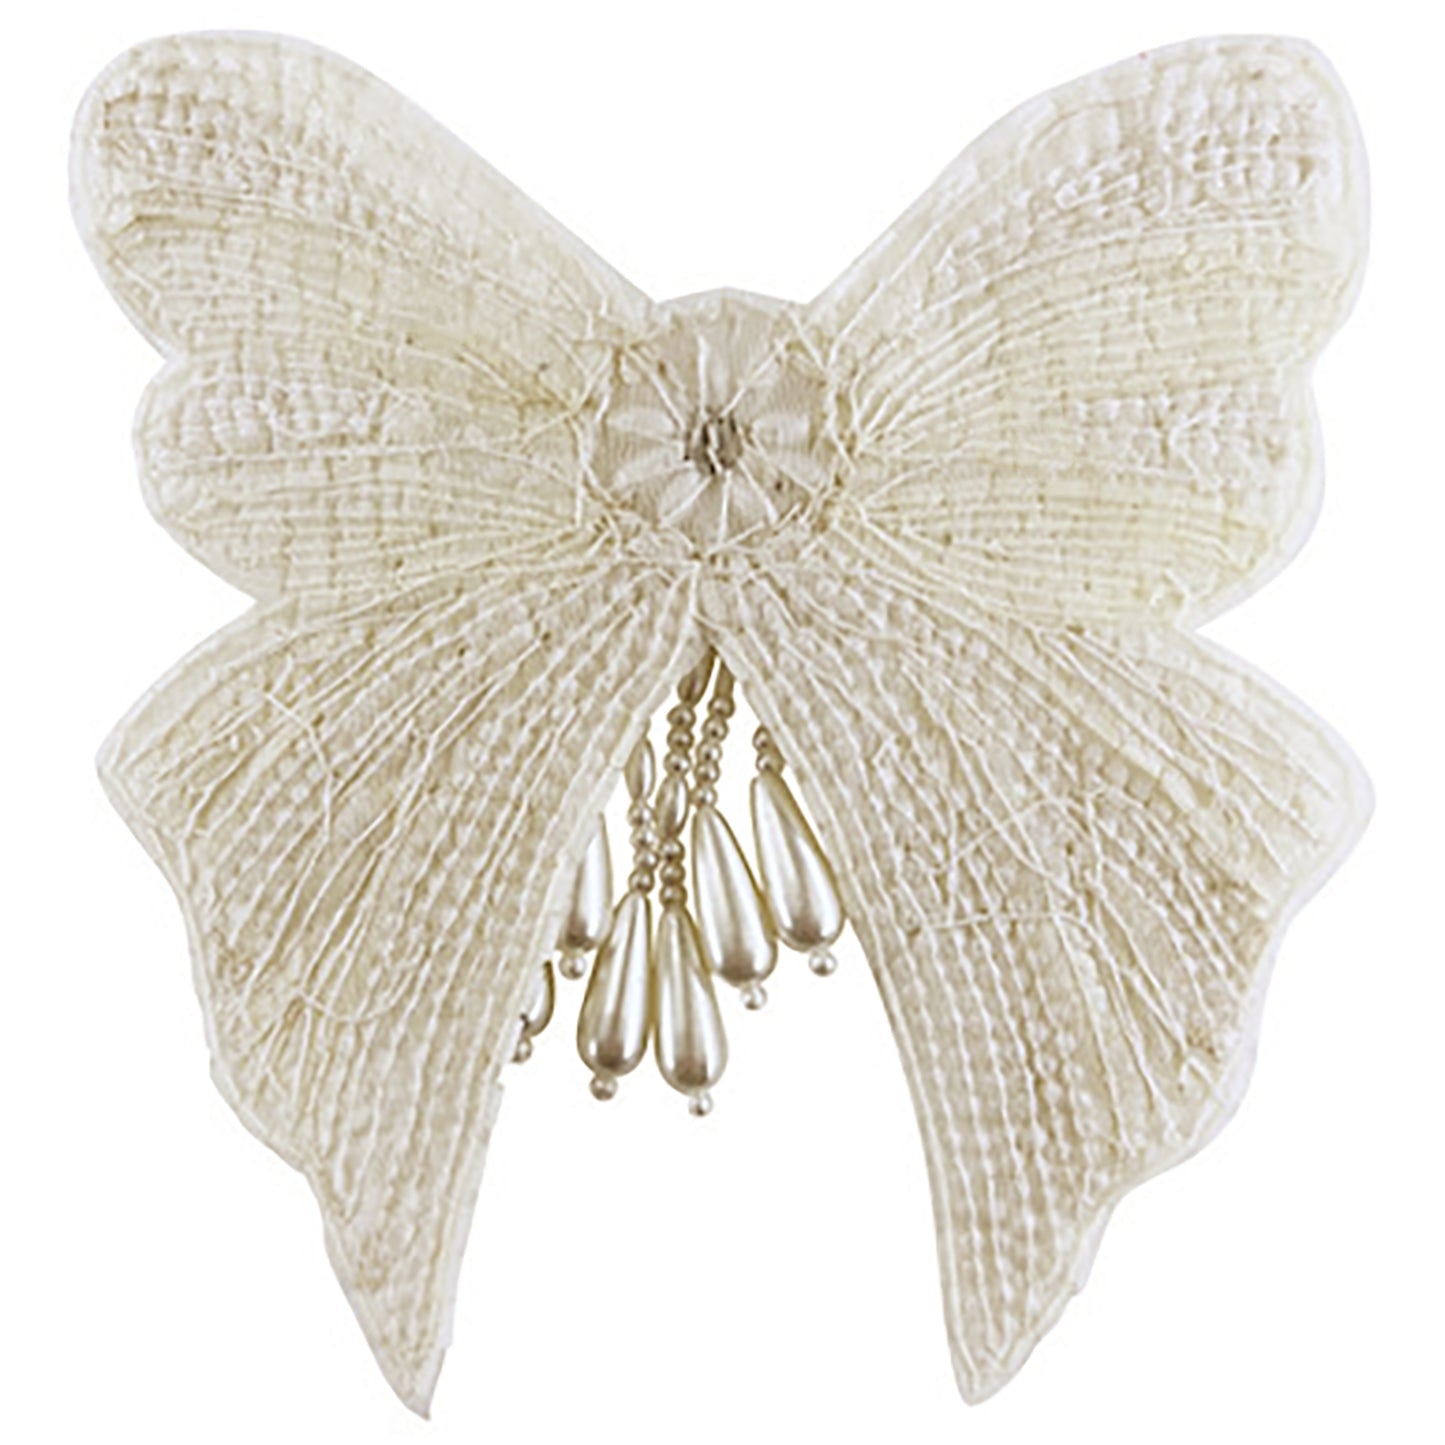 Vintage Bridal Bow With  Pearls Applique/Patch  - Ivory Multi